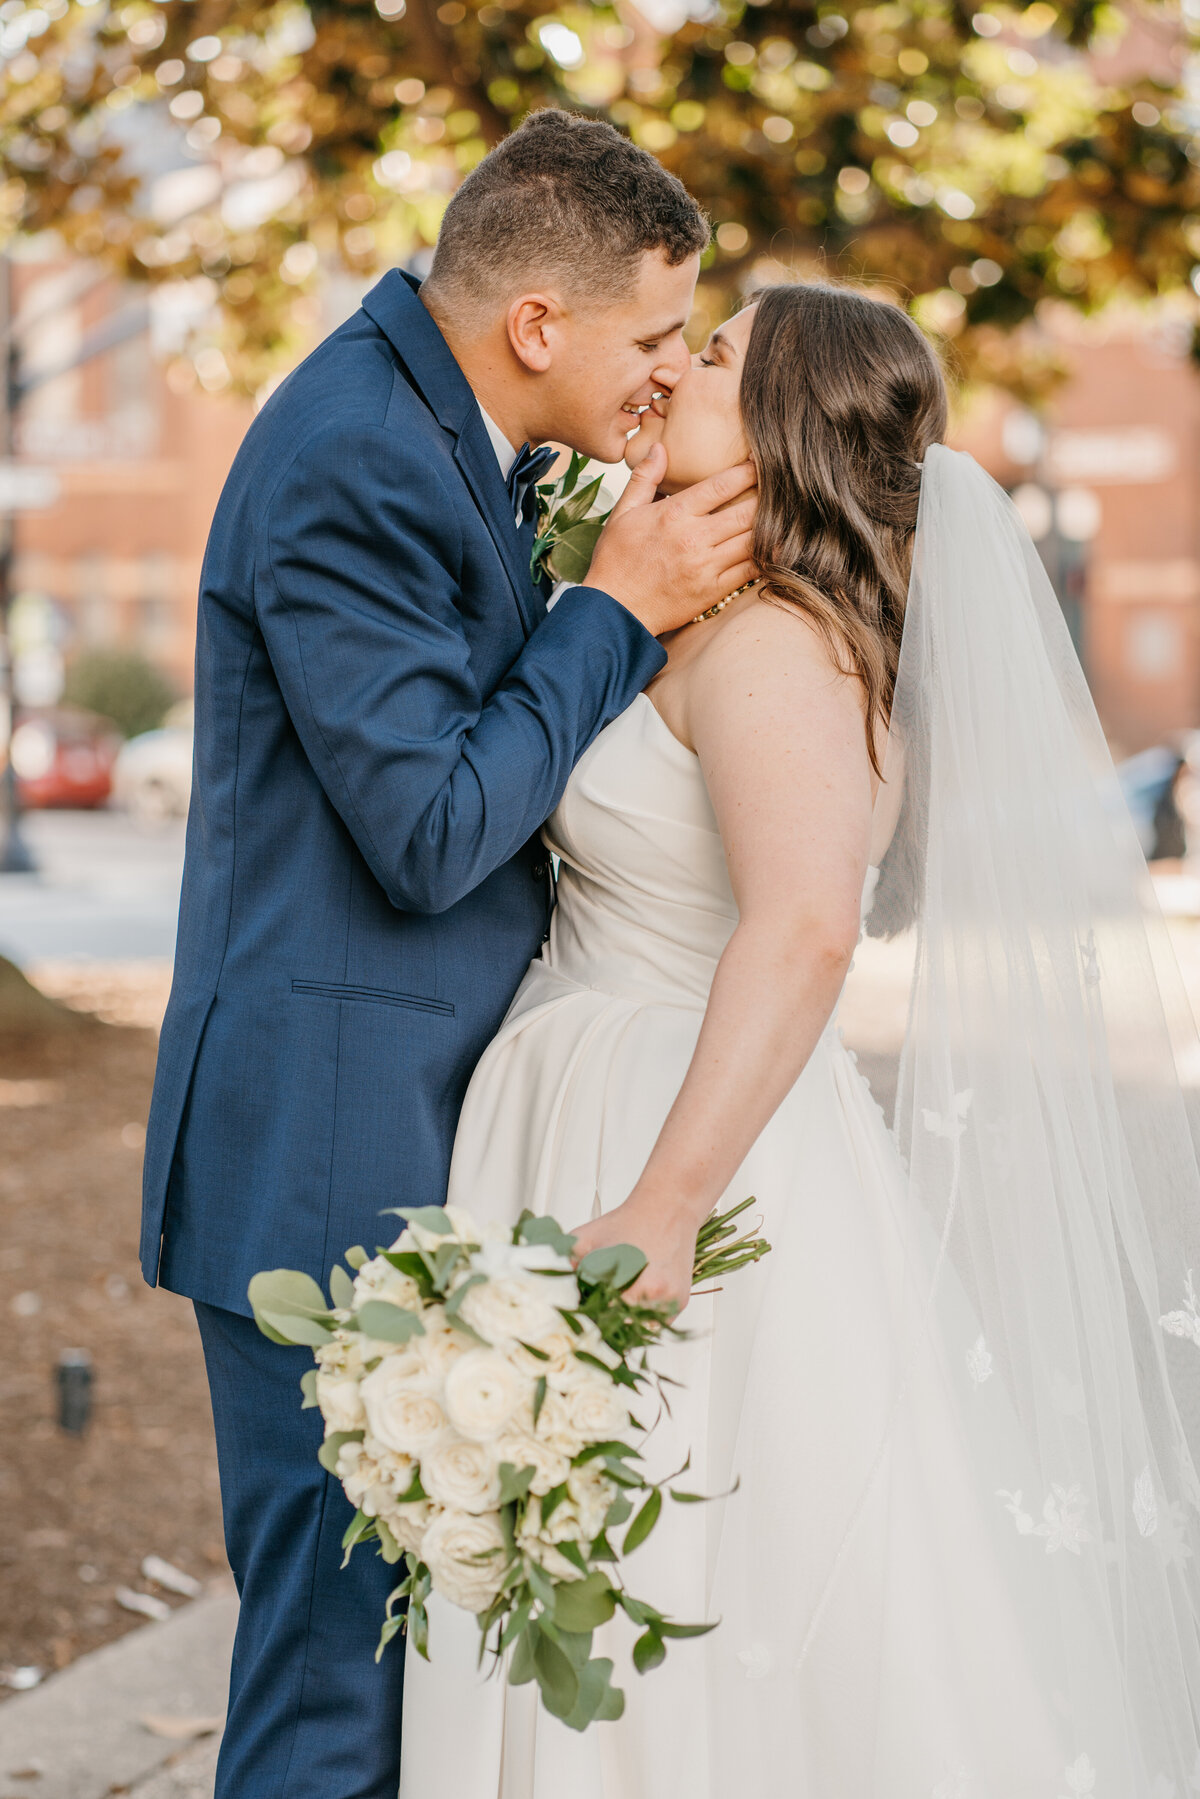 Raleigh wedding photographer capturing intimate moments